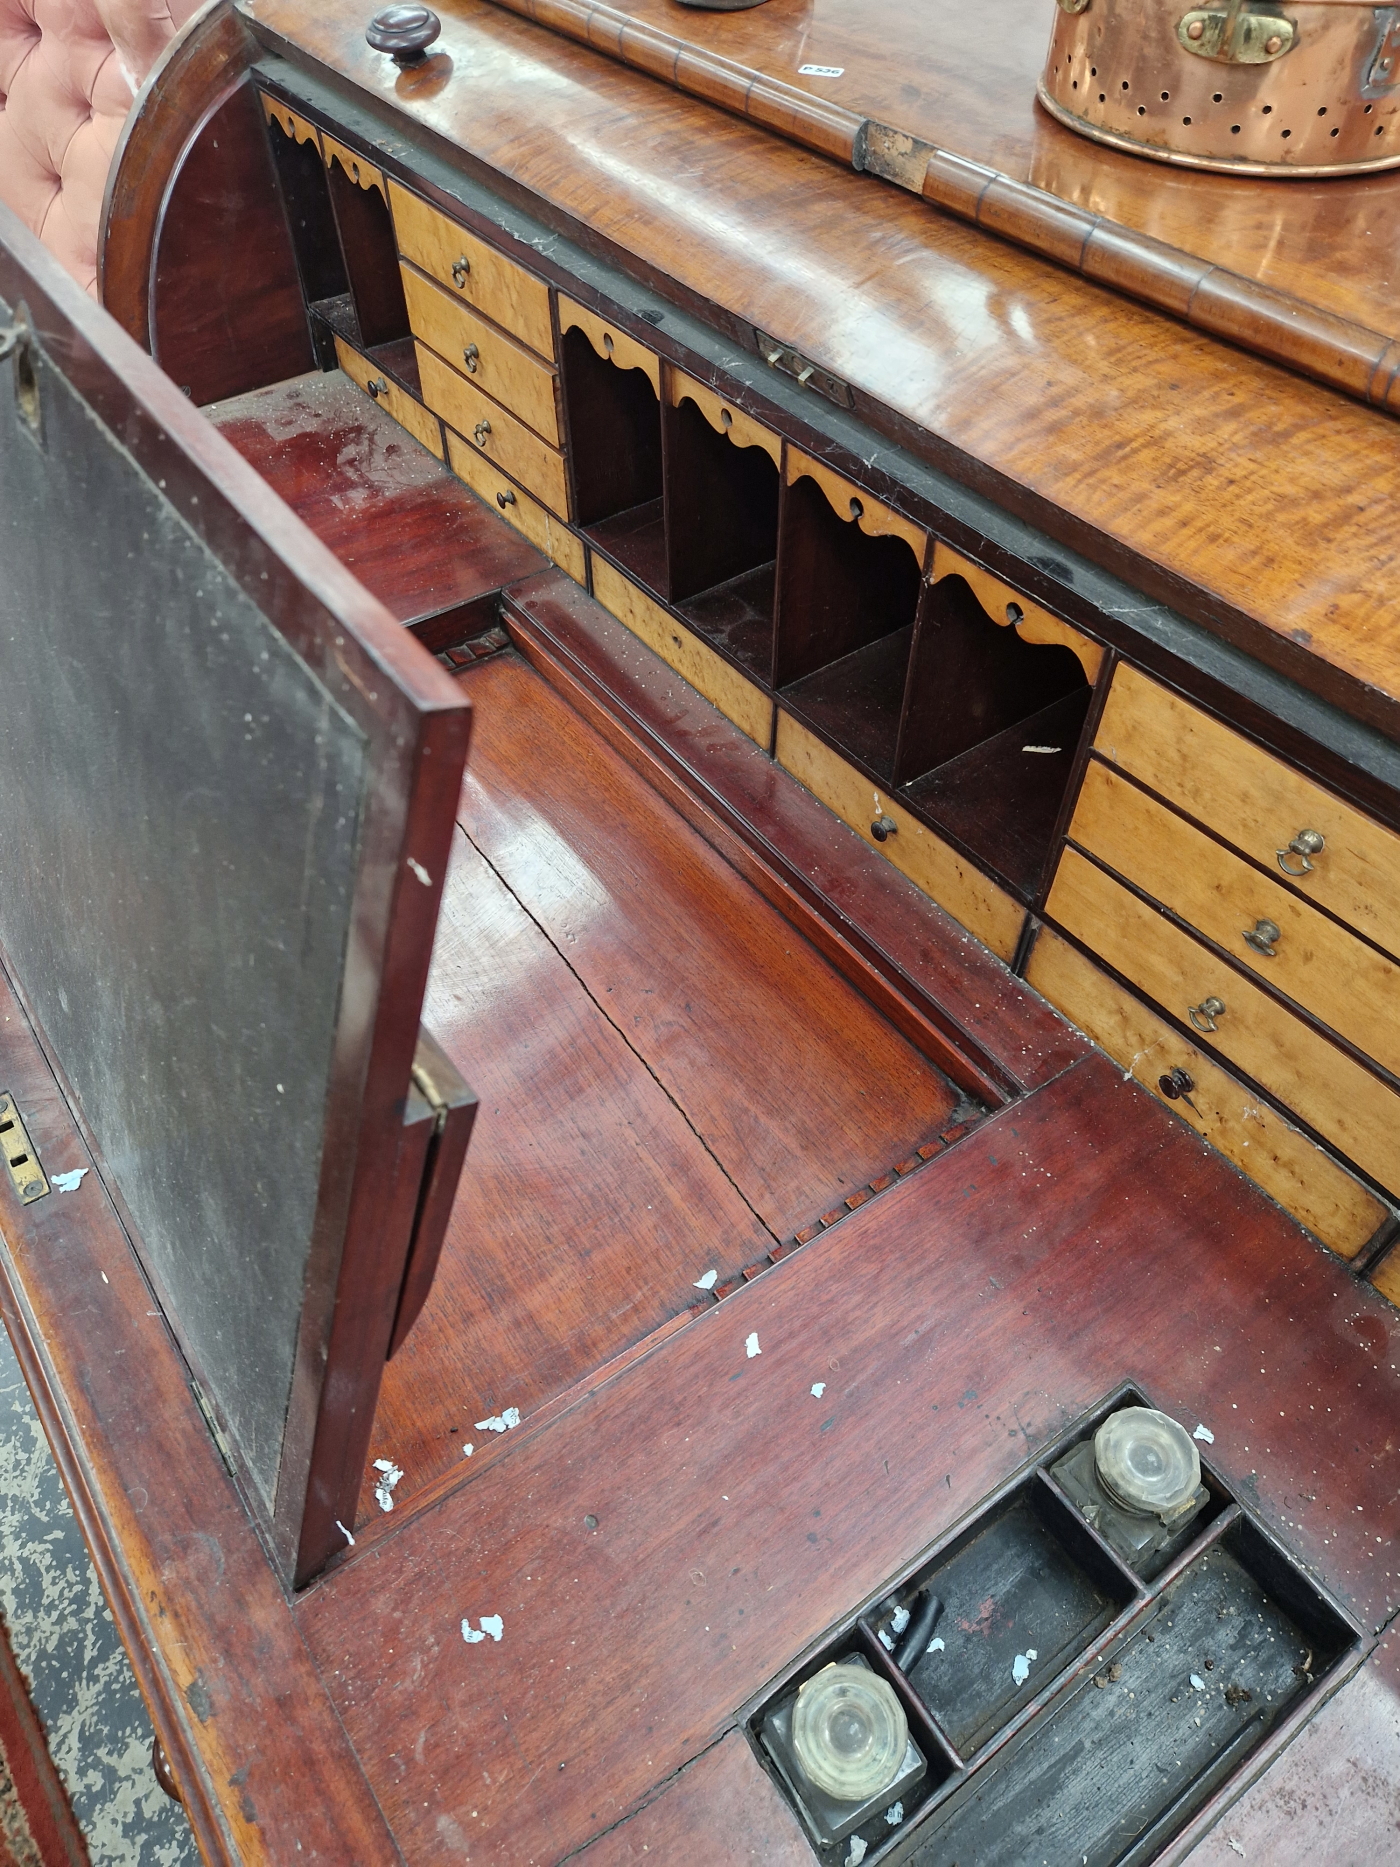 A 19th C. MAHOGANY ROLL TOP DESK WITH A CONFIGURATION OF FIVE DRAWERS ABOVE THE CYLINDRICAL LEGS - Image 6 of 9